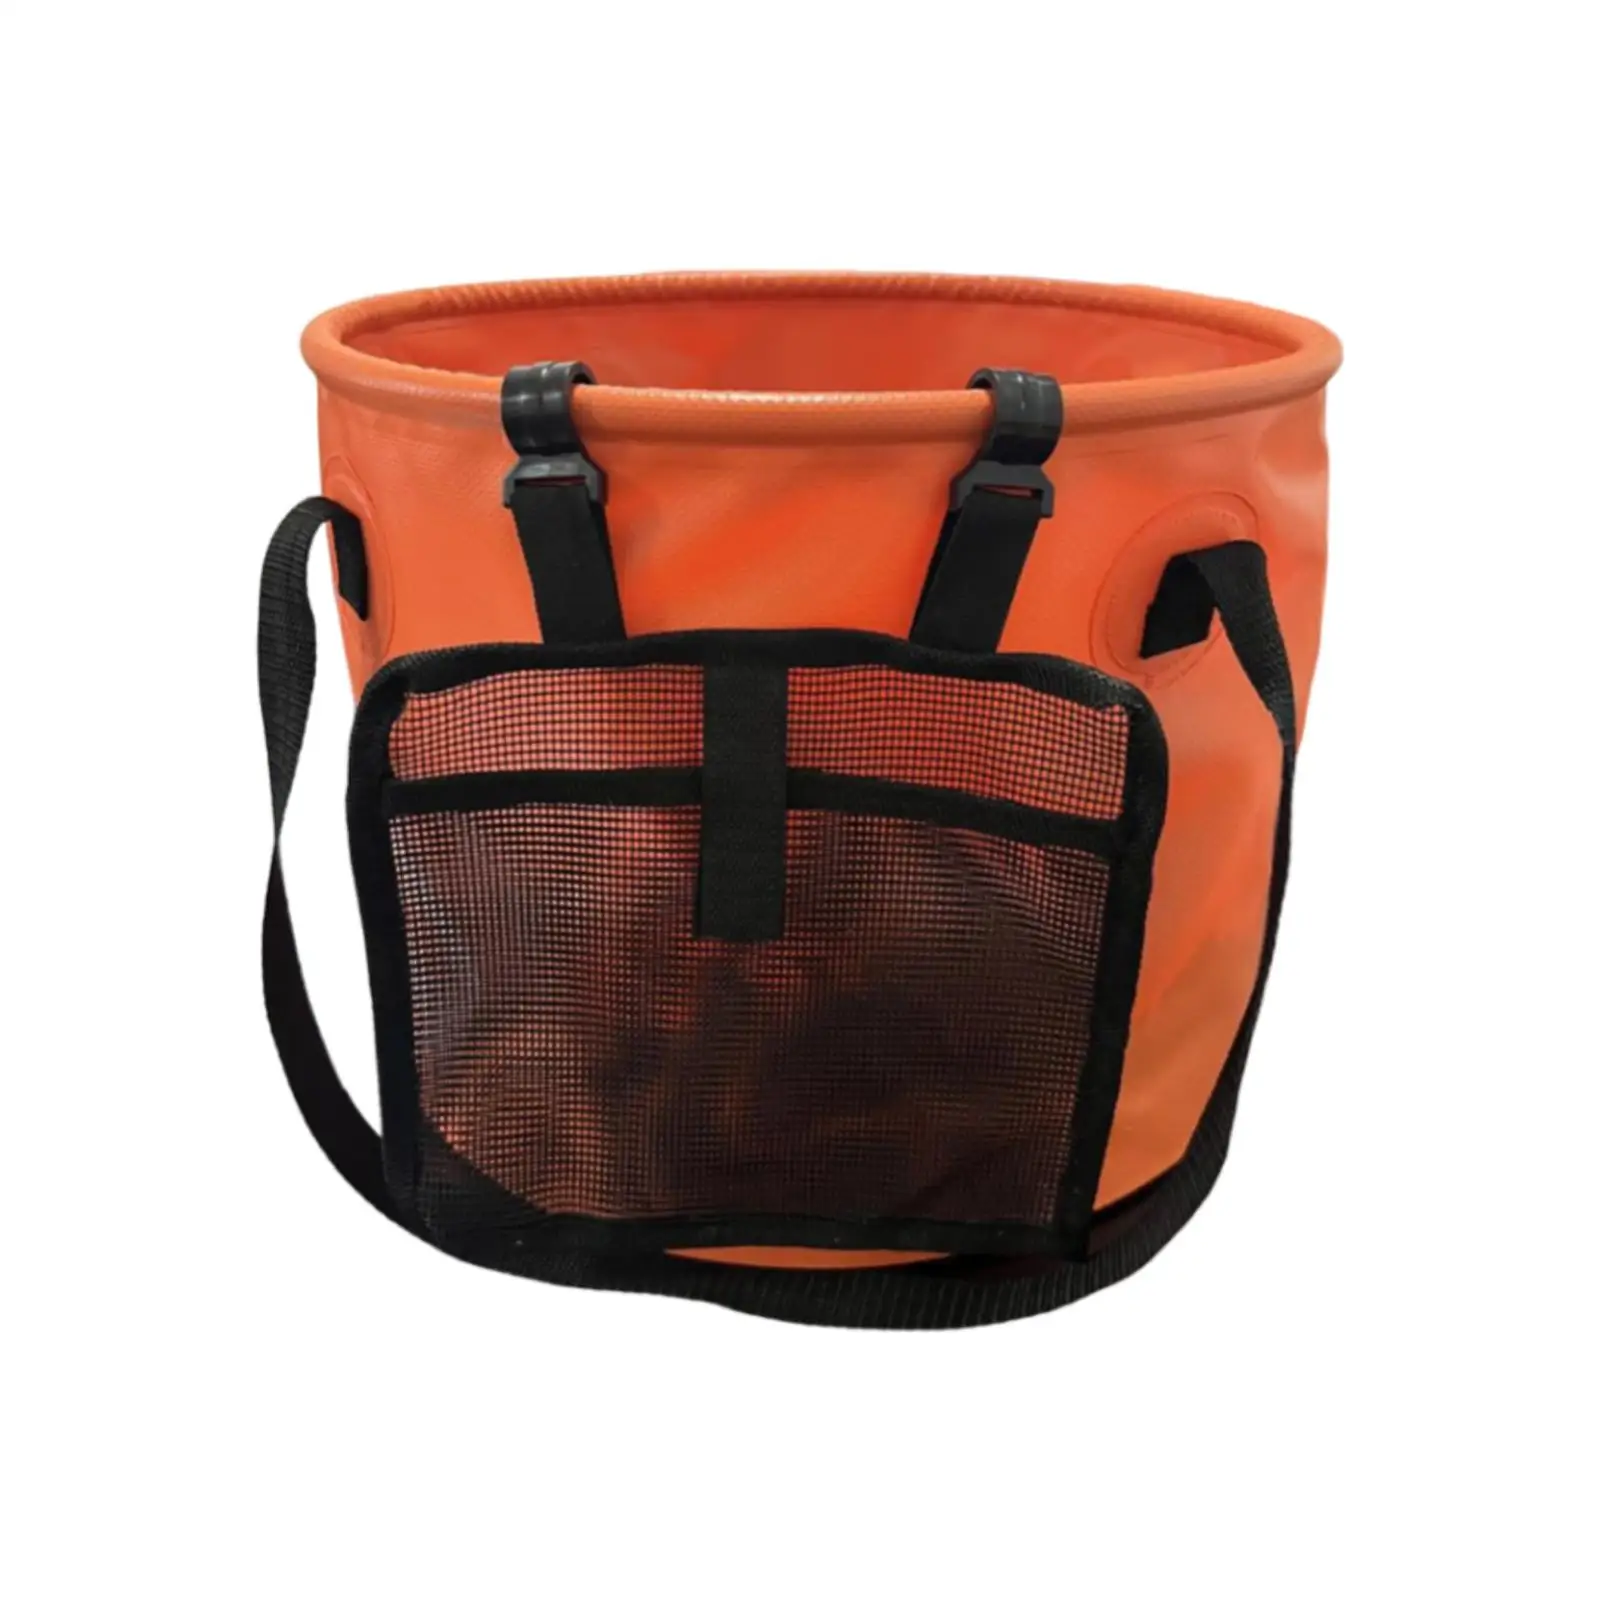 Collapsible Bucket with Handle Water Bag Foldable Water Bucket Collapsible Wash Basin for Cleaning Beach Travelling Car Washing